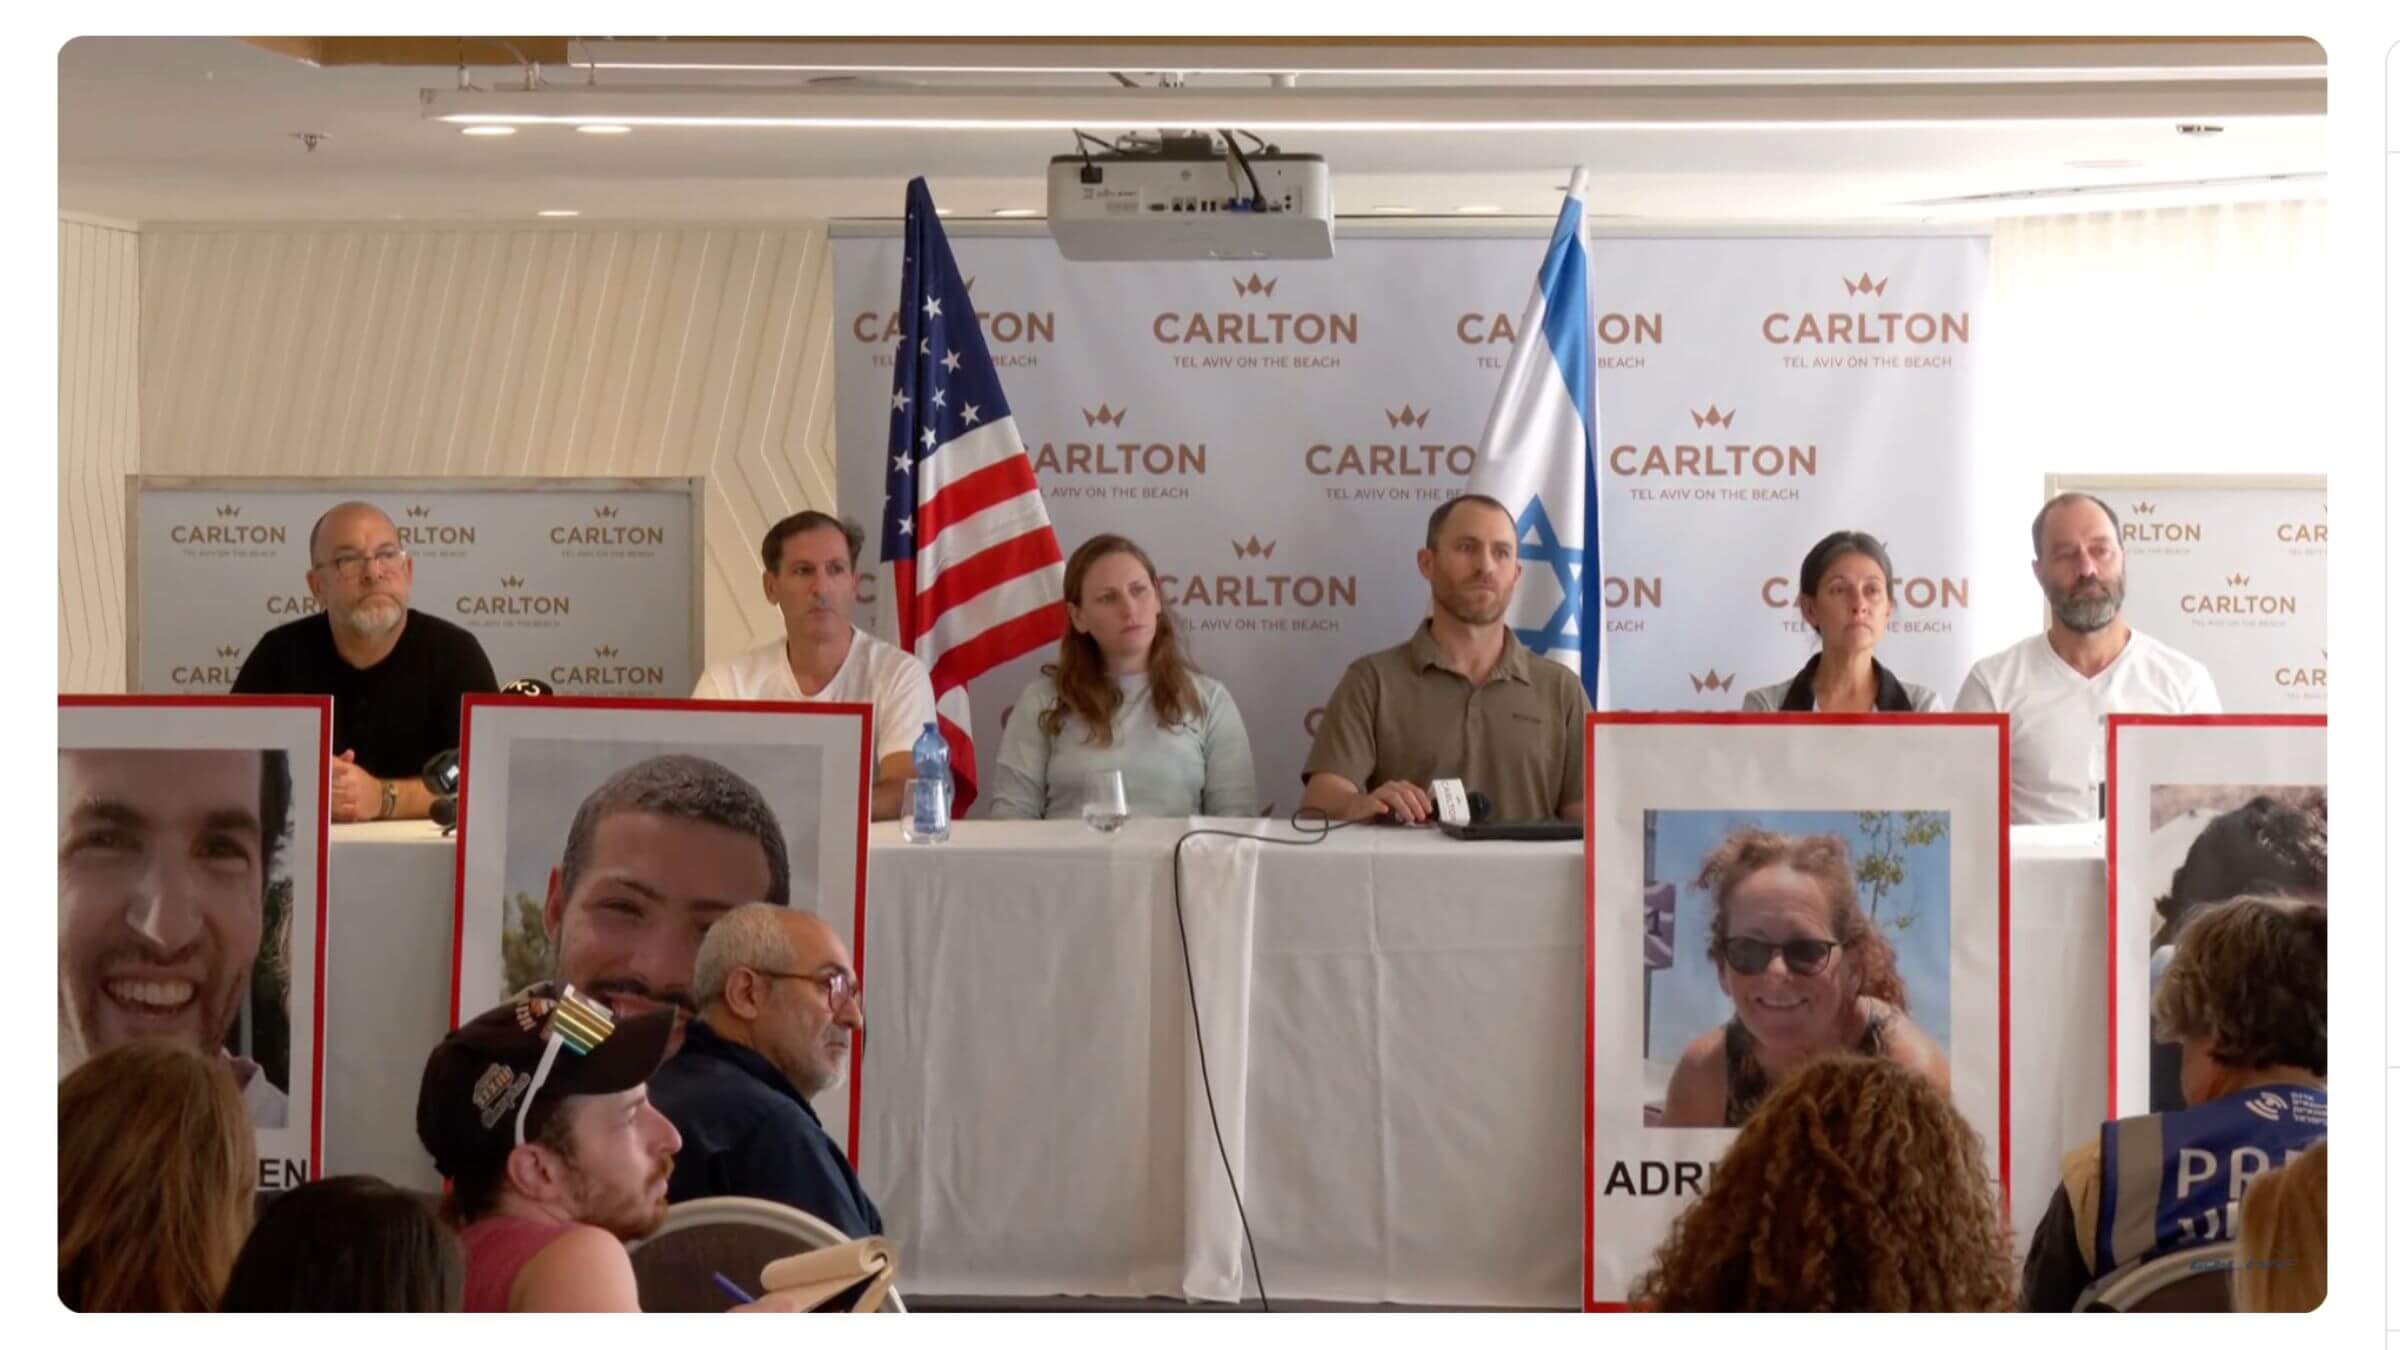 Family members of four U.S. citizens missing in Israel asked the U.S. to intervene. From left to right, Jonathan Dekel-Chen, father of Sagui Chen; Ruby Chen, father of Itay Chen; Ayana and Nahal Neta, children of Adrienne Neta, and Rachel Goldberg and Jon Polin, parents of Hirsch Goldberg-Polin.